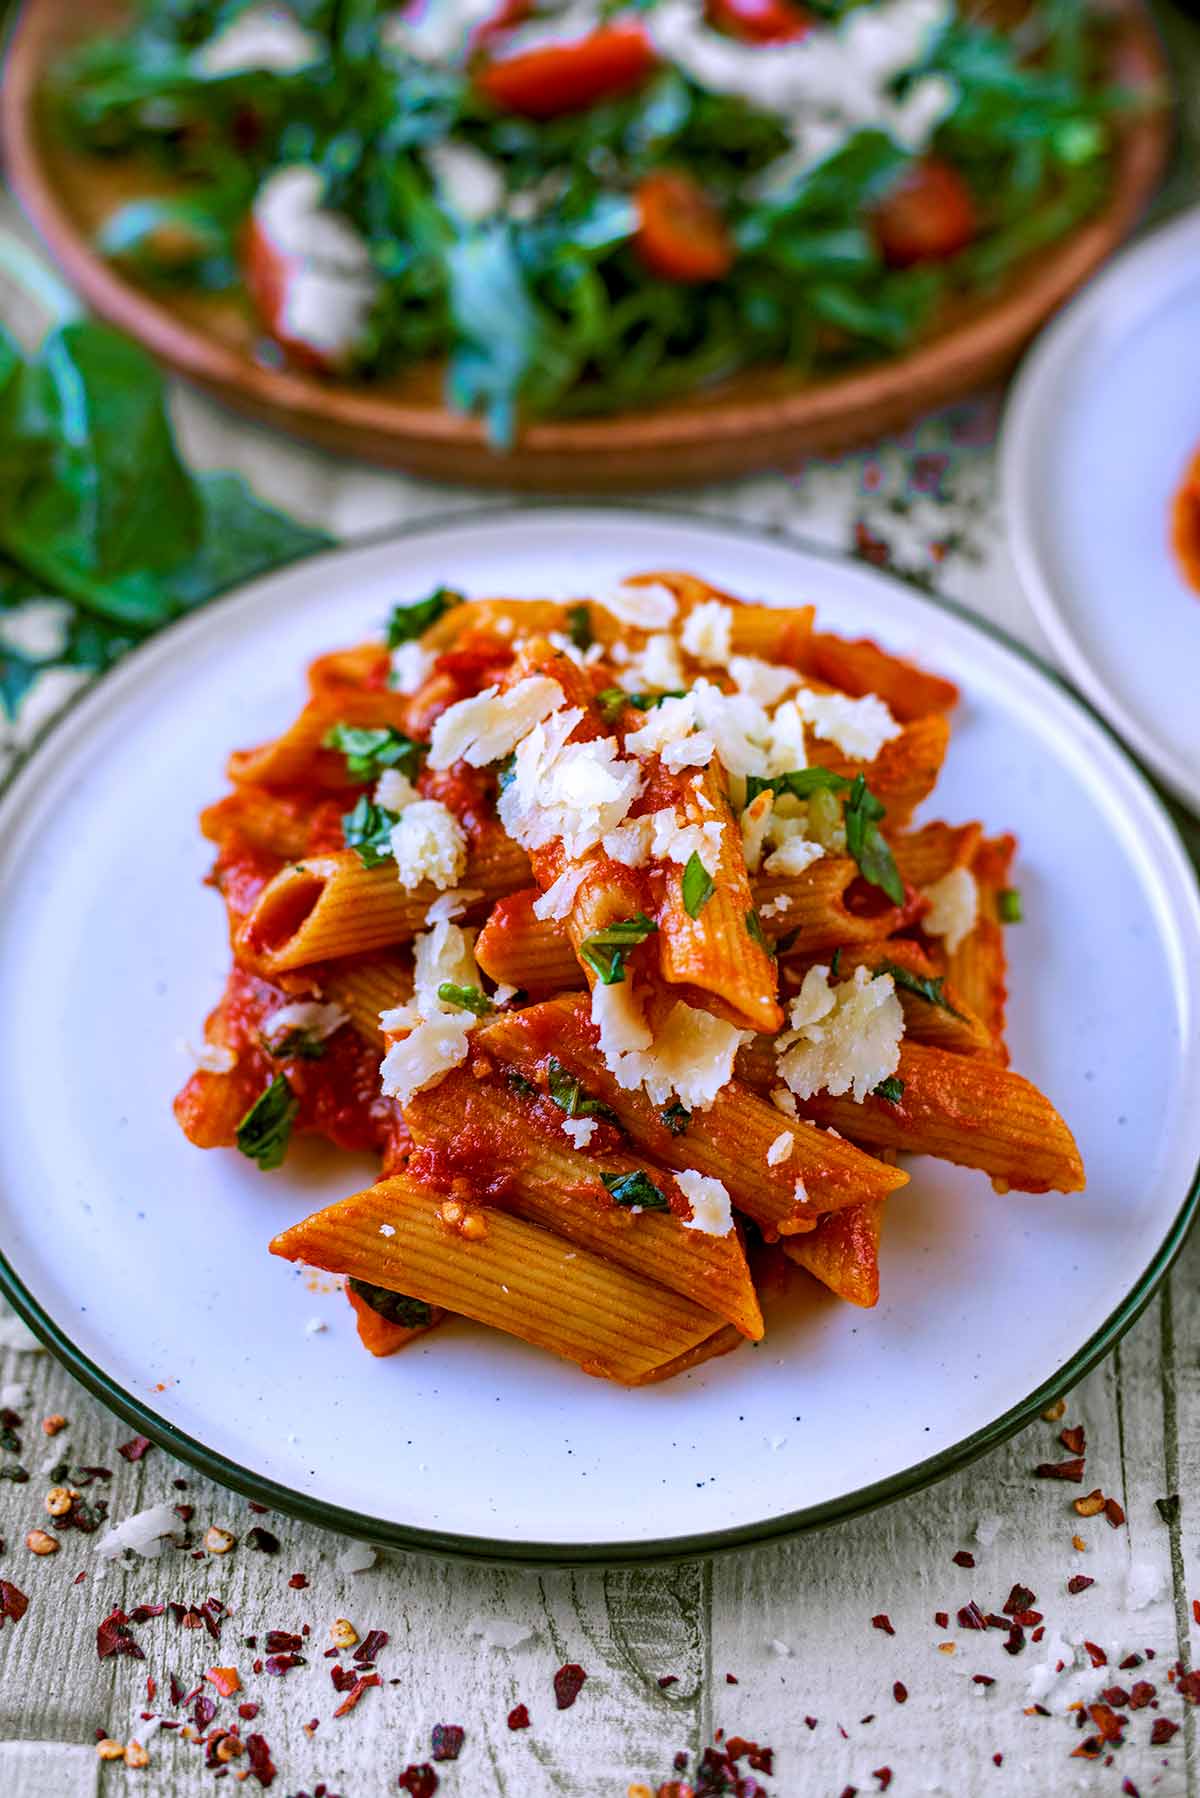 Tomato pasta on a plate in front of a plate of salad.